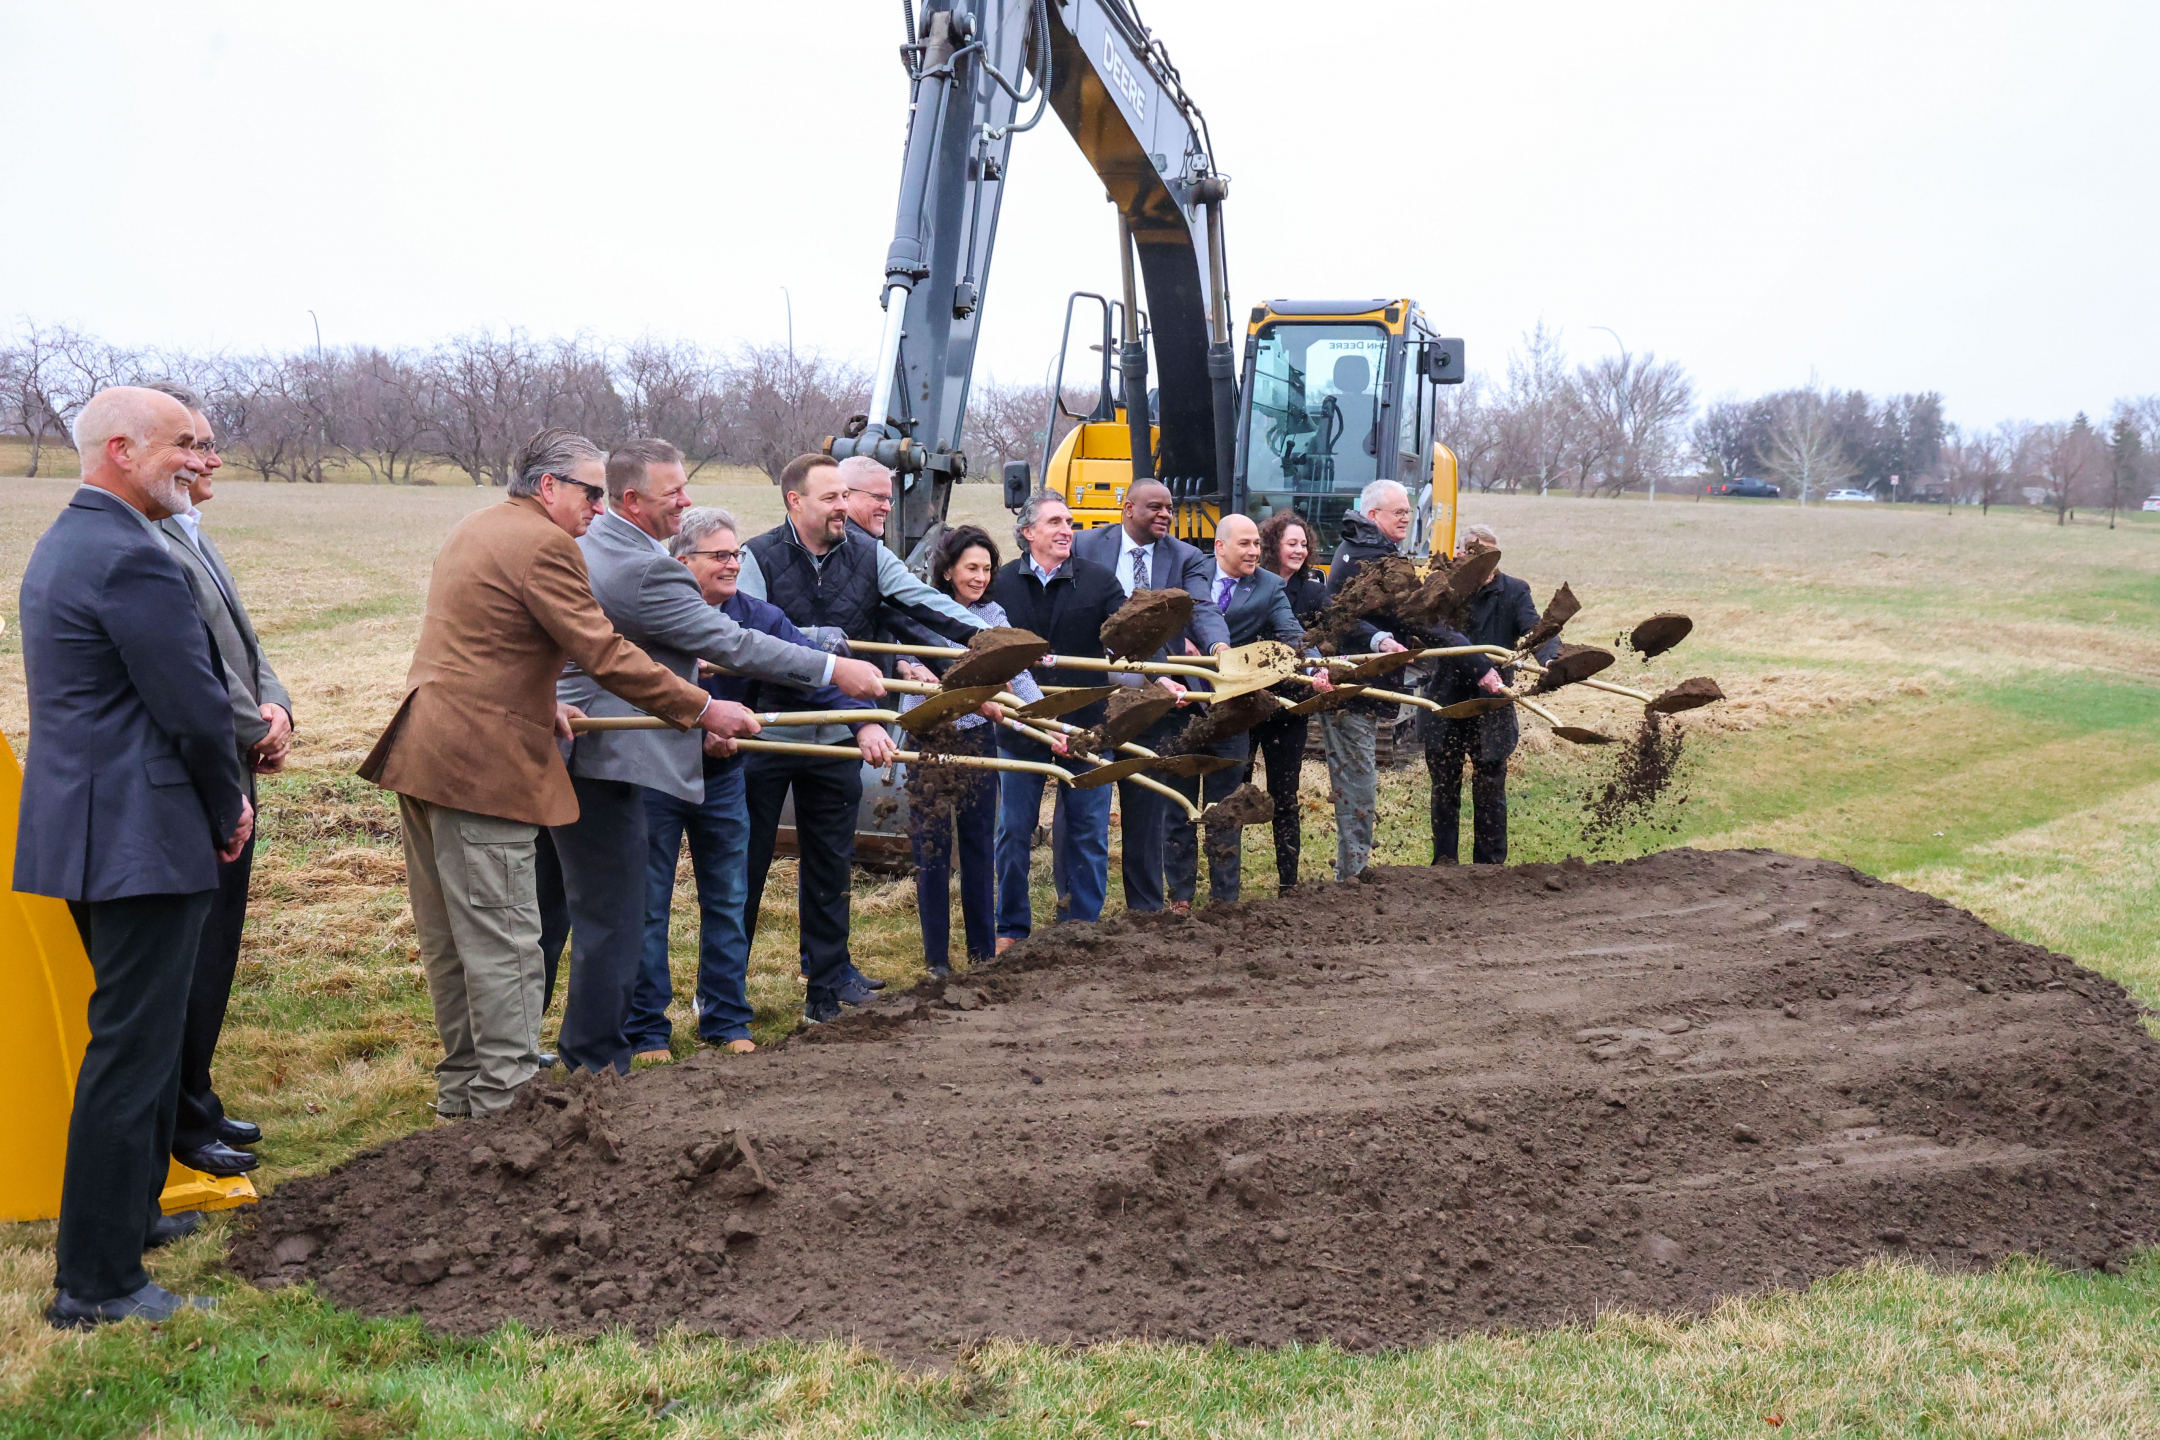 A group of government dig the first shovel-fulls of dirt from the state lab construction site.